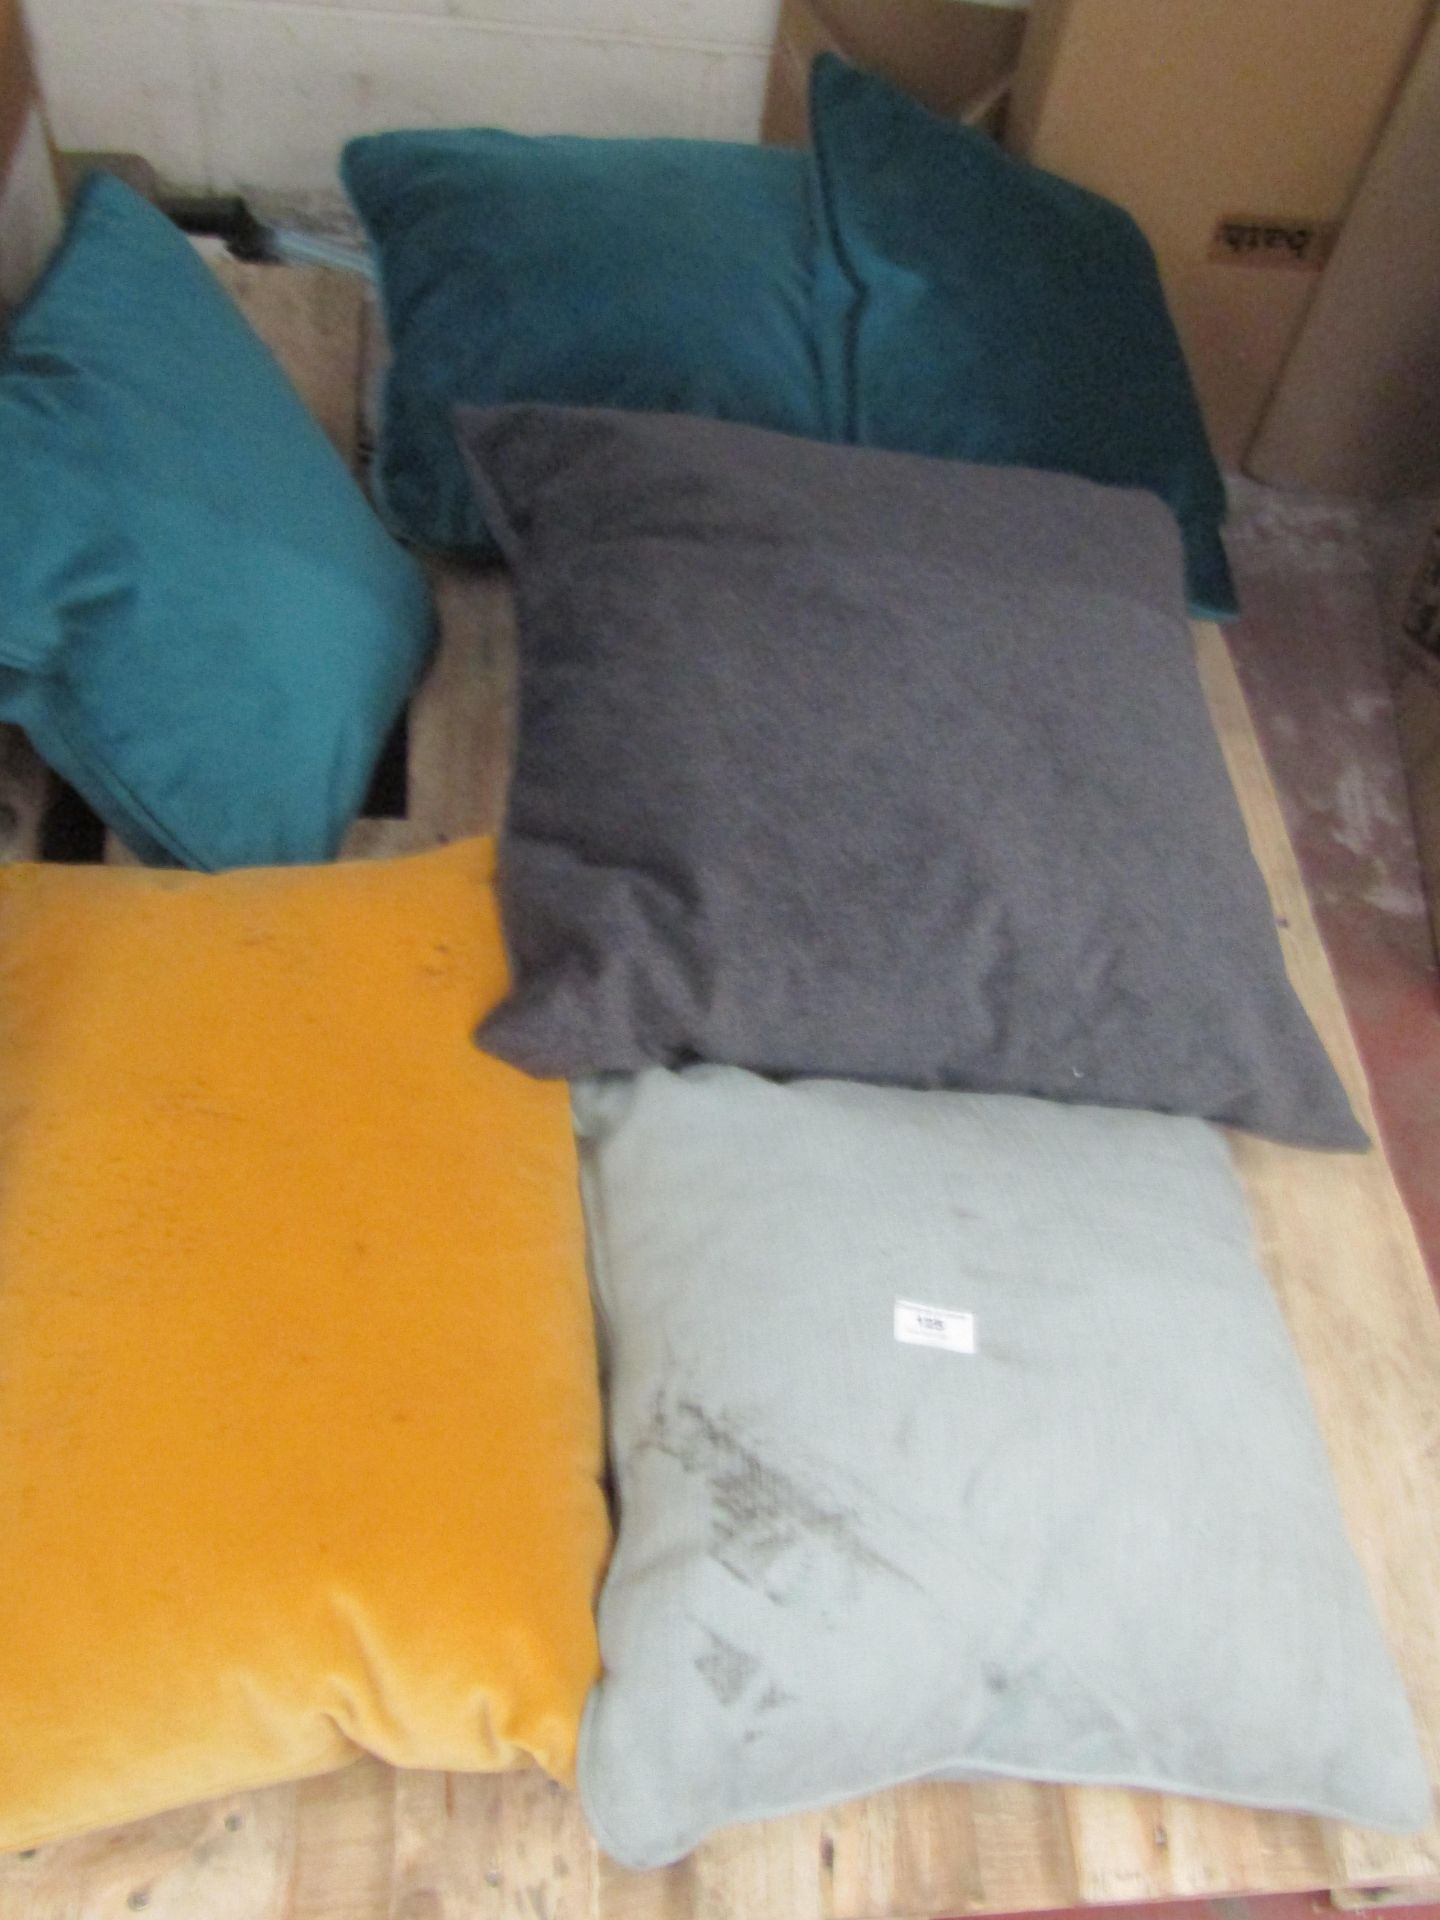 | 6X | VARIOUS SIZED SWOON CUSHIONS ALL ARE DIRTY AND NEED A CLEAN | UNCHECKED AND BOXED | RRP £- |